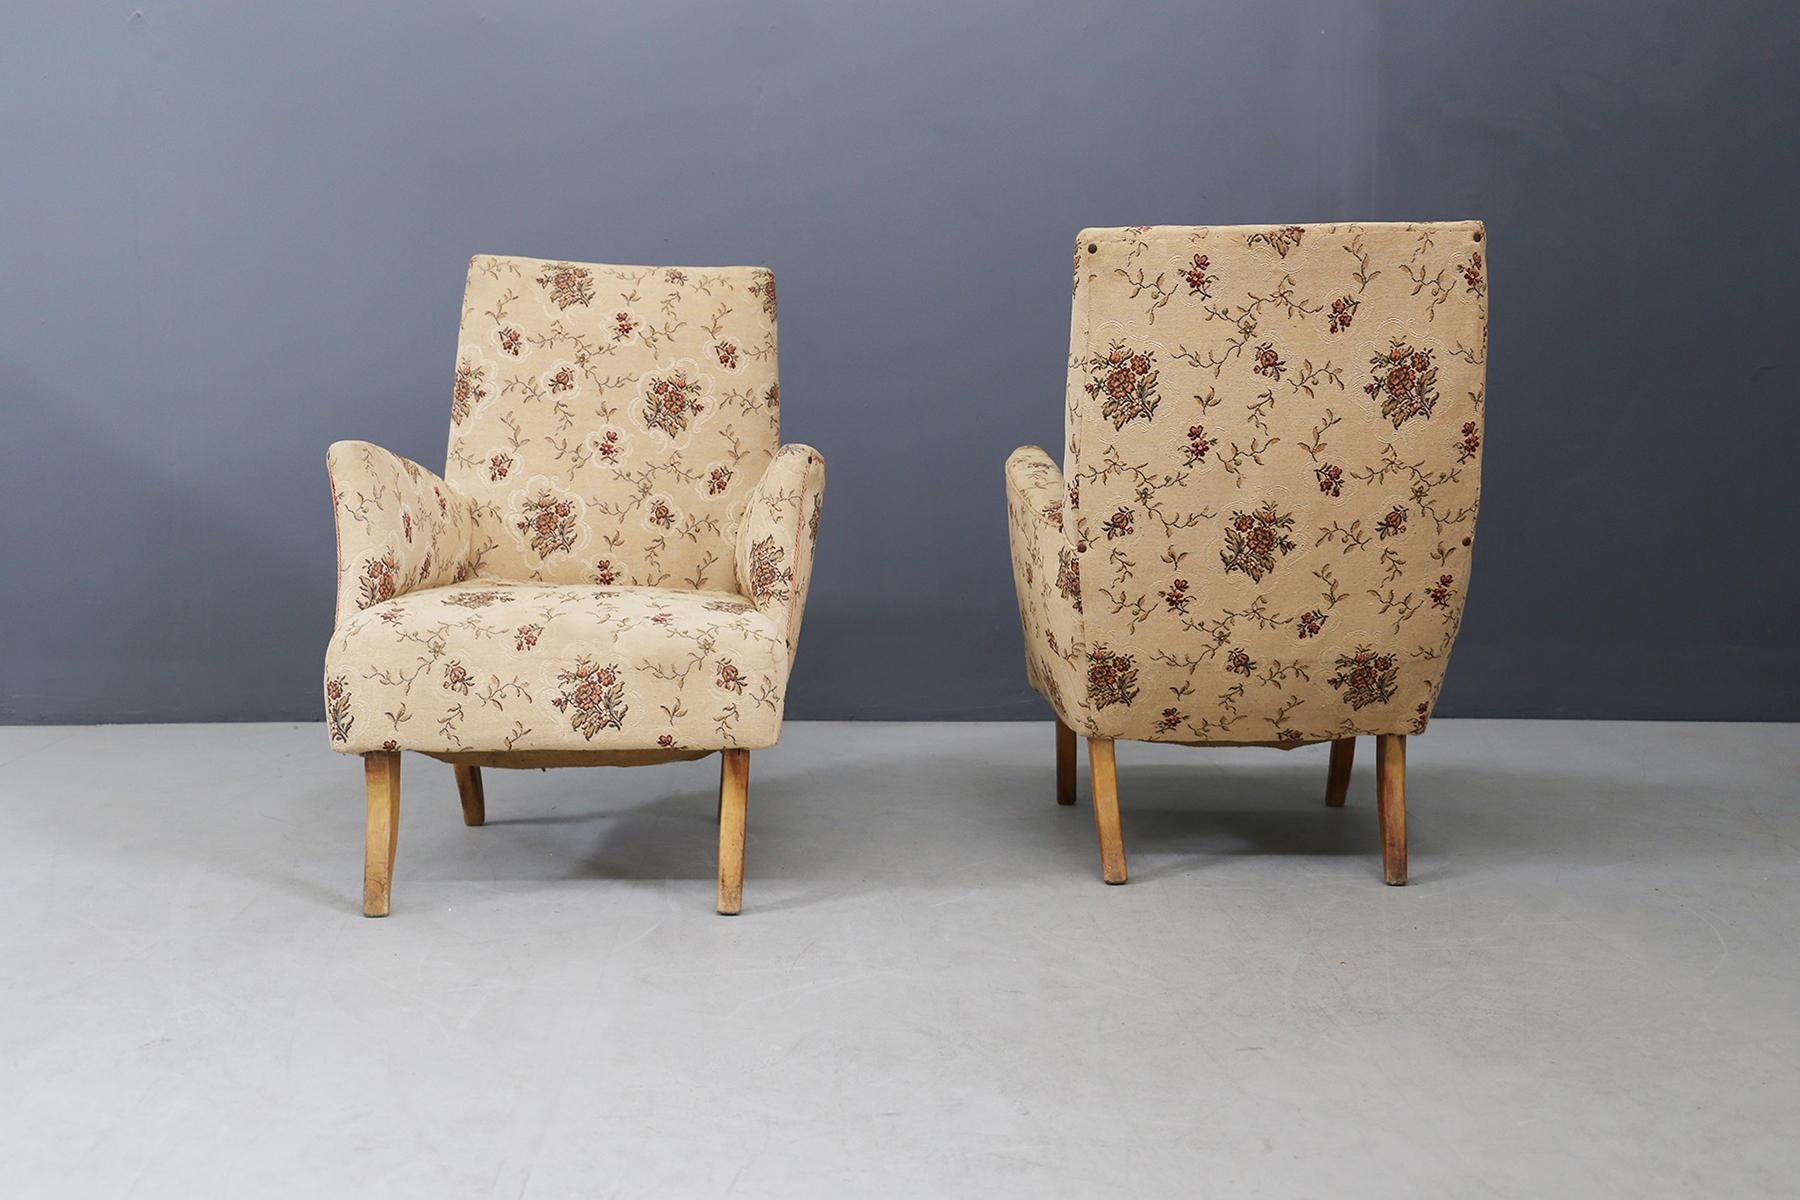 Beautiful pair of Italian armchairs attributed to Melchiorre Bega from the 1950s.
Melchiorre Bega armchairs were made of beige colored cotton fabric with floral inserts and wood.
Original fabric and frame from the period.